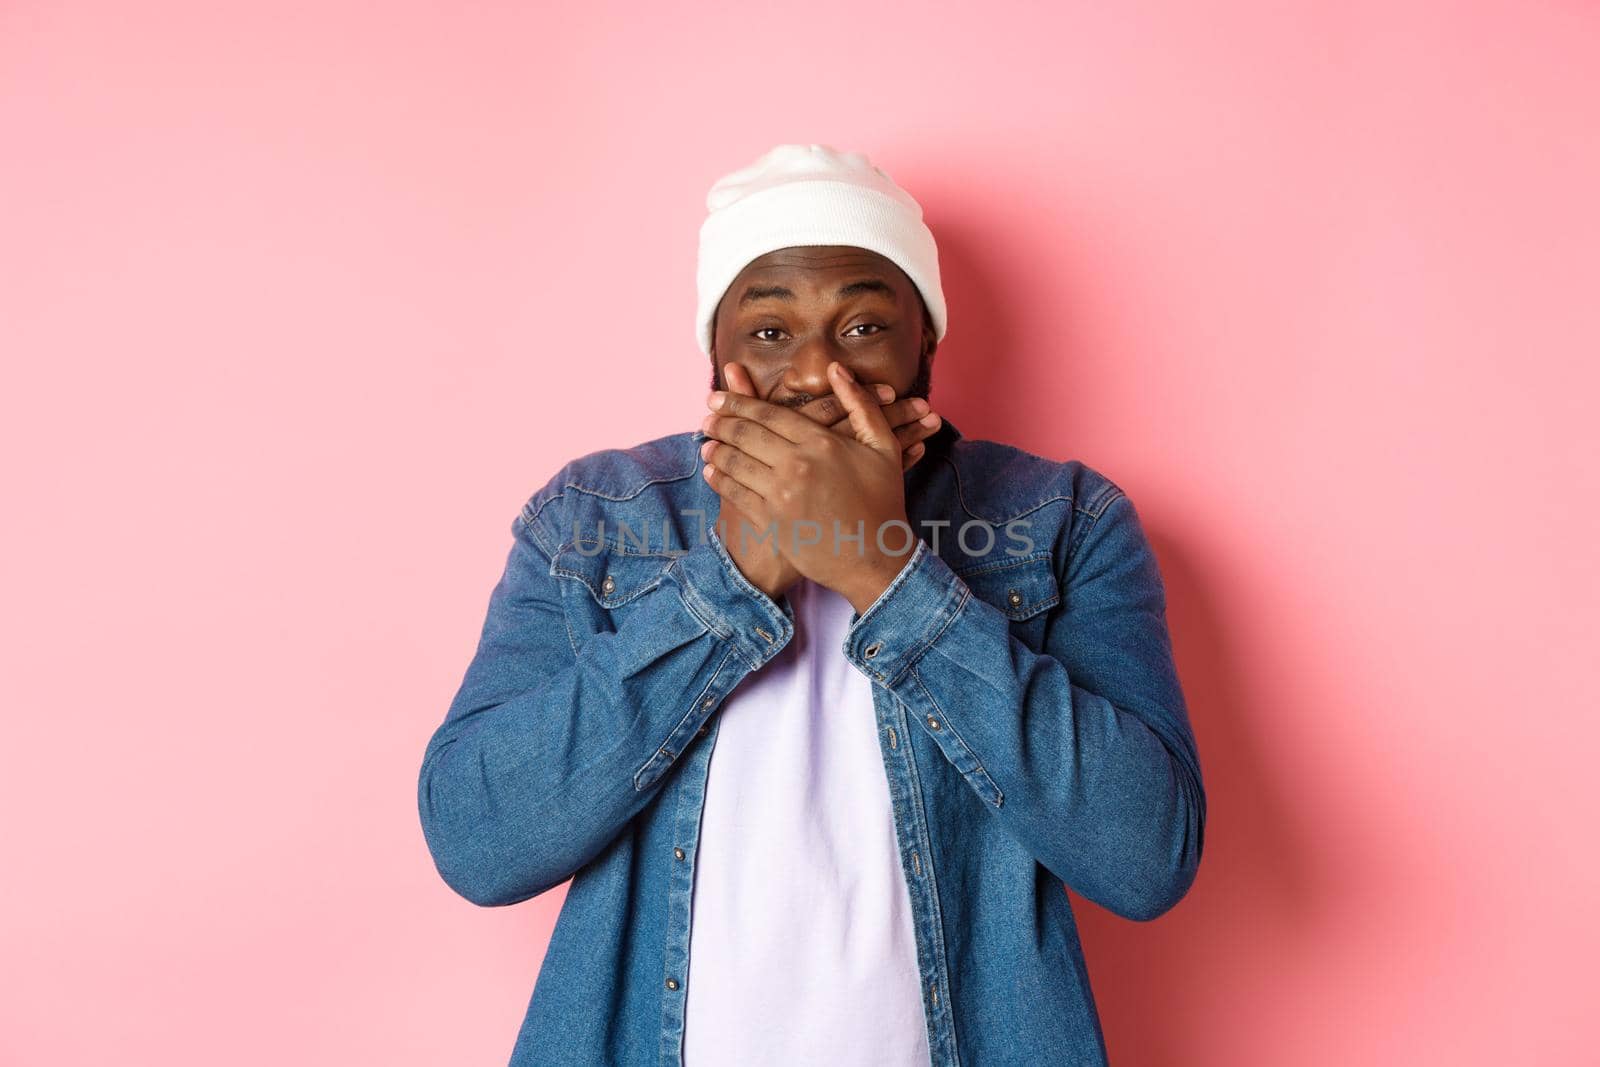 Happy Black hipster man holding laugh, cover mouth and giggle over funny joke, staring at camera and chuckling, standing over pink background.